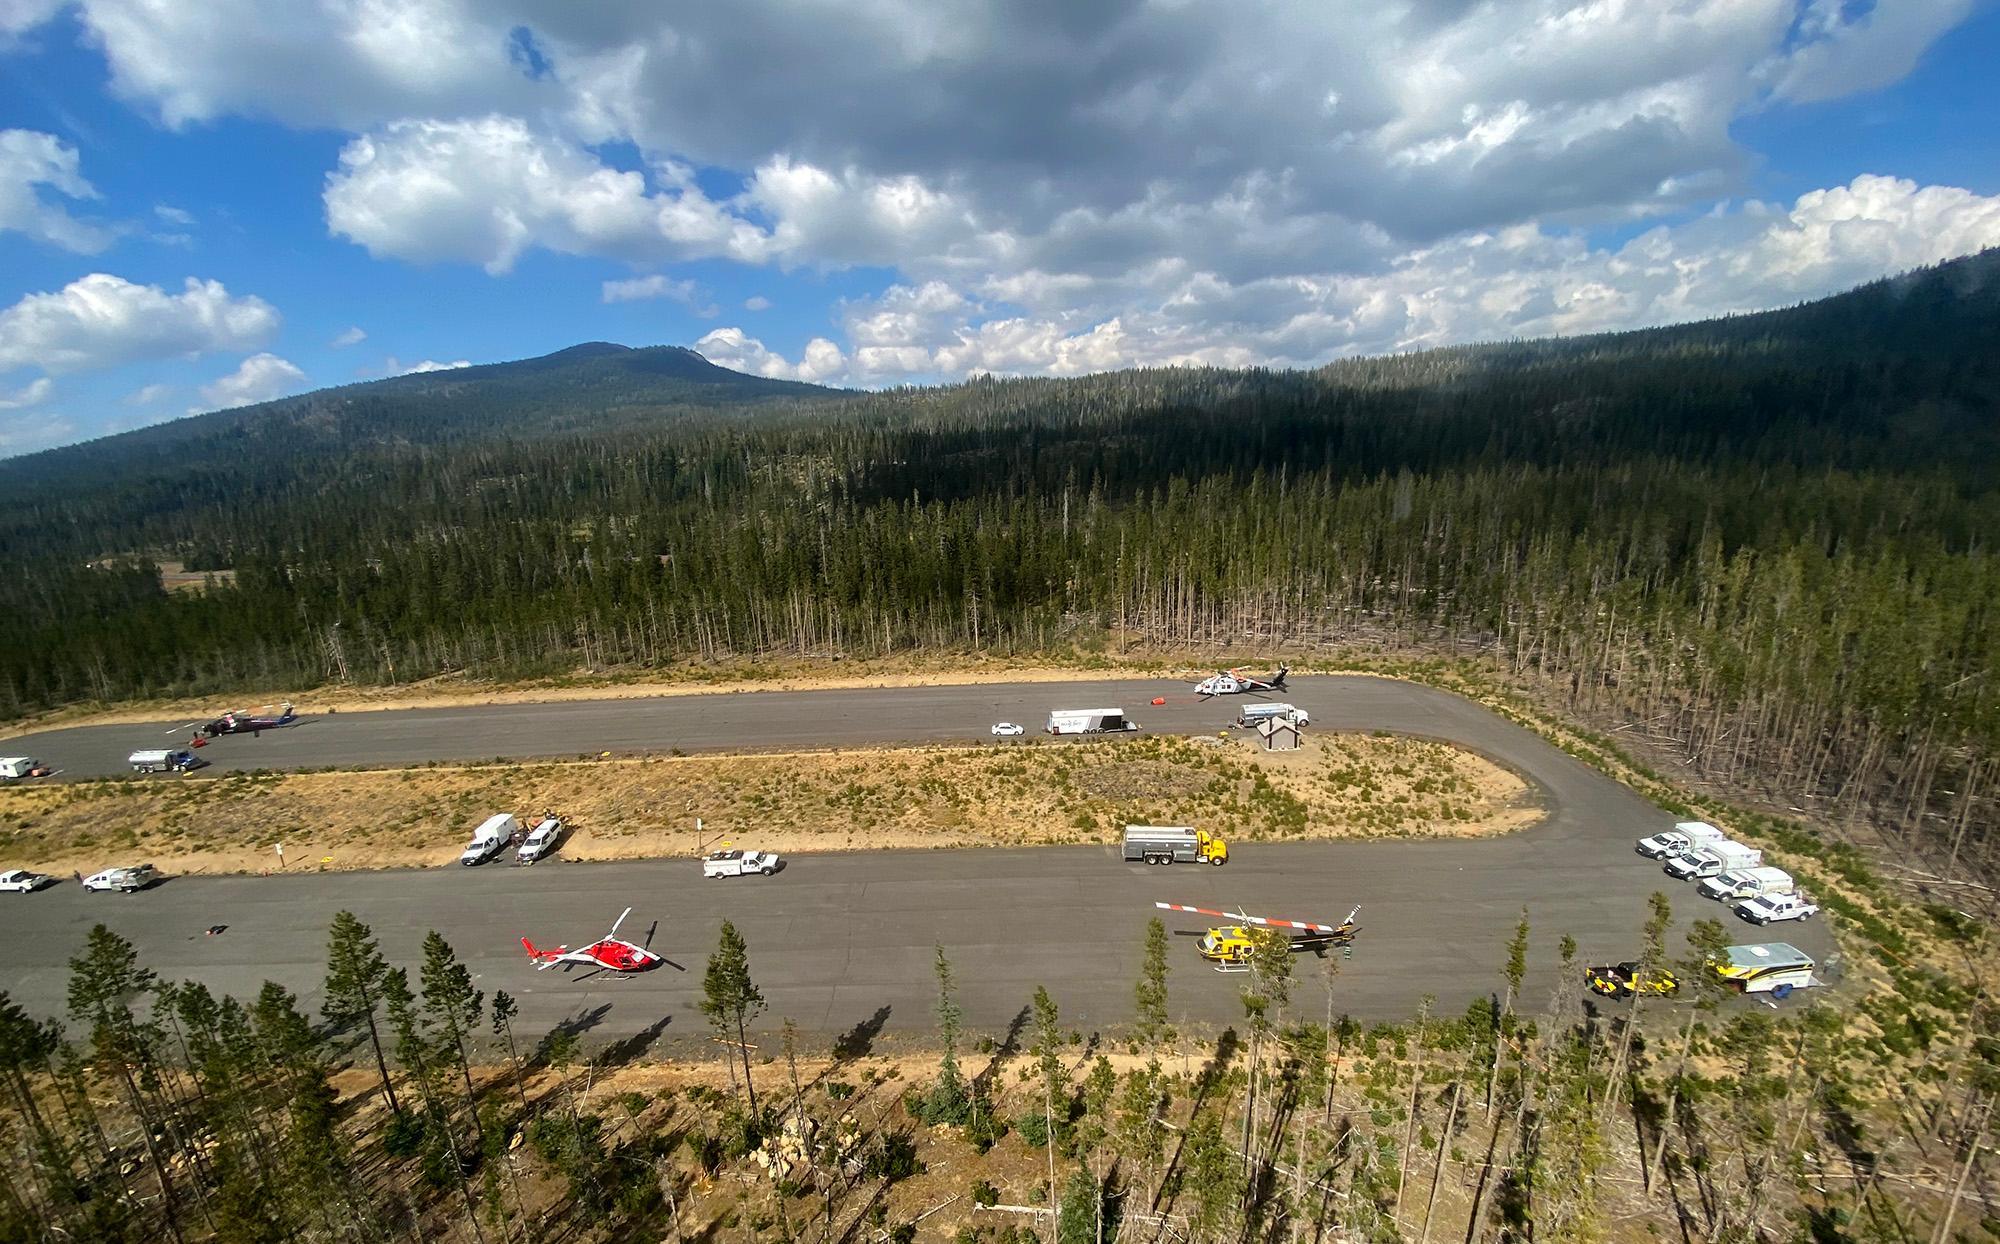 An aerial view of helicopters parked at a Sno-Park surrounded by pine trees.